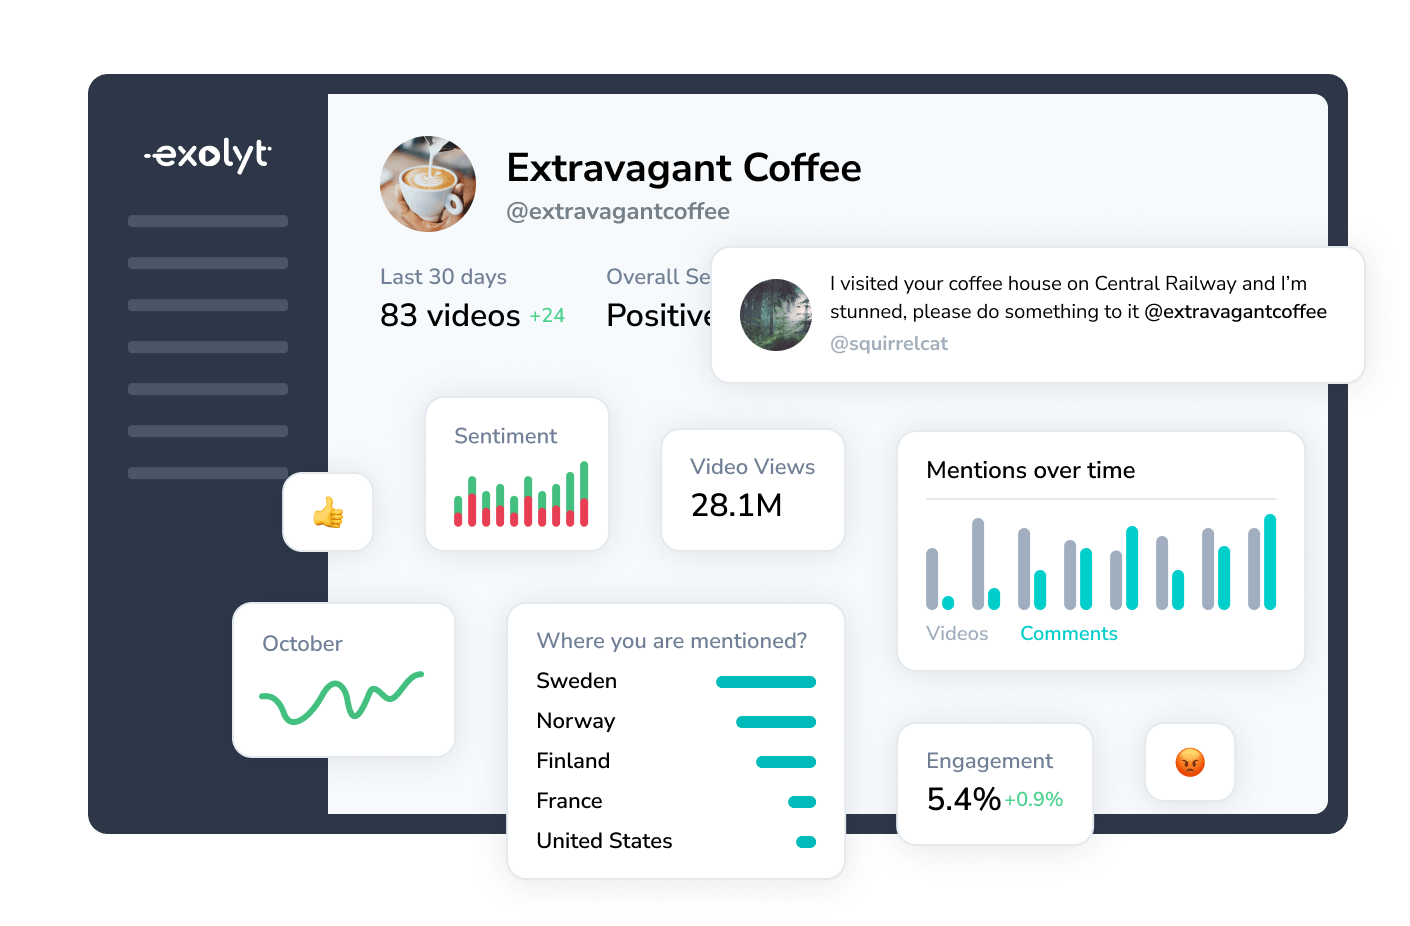 An account-level dashboard view shows different account metrics, such as video views, engagement rates, mentions, and comments.